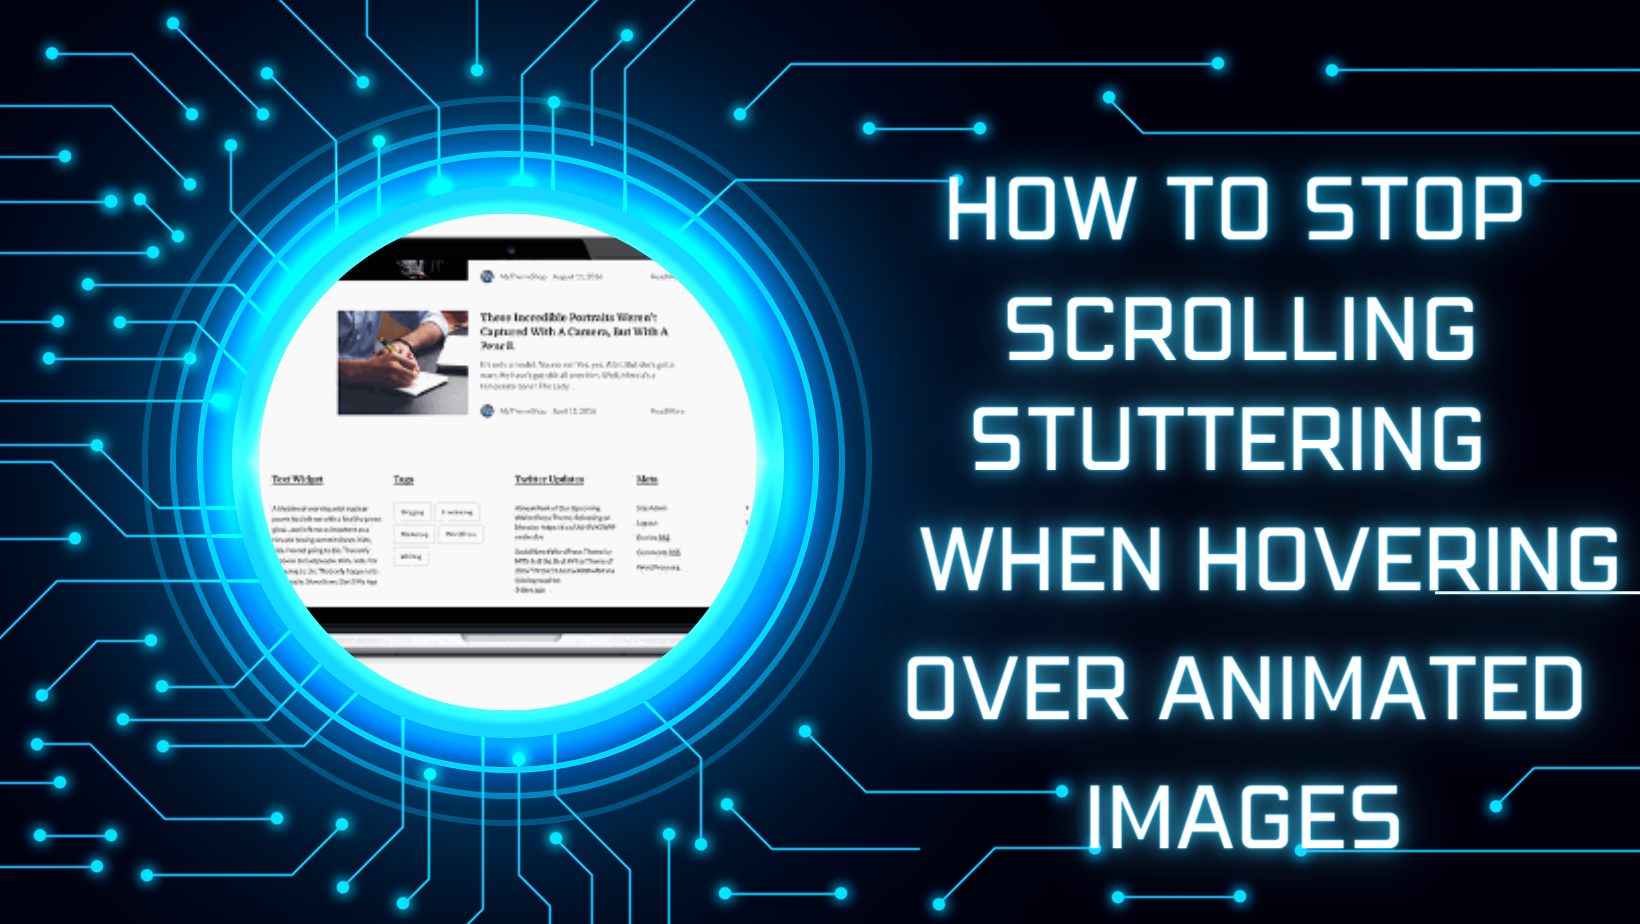 how to stop scrolling stuttering when hovering over animated images